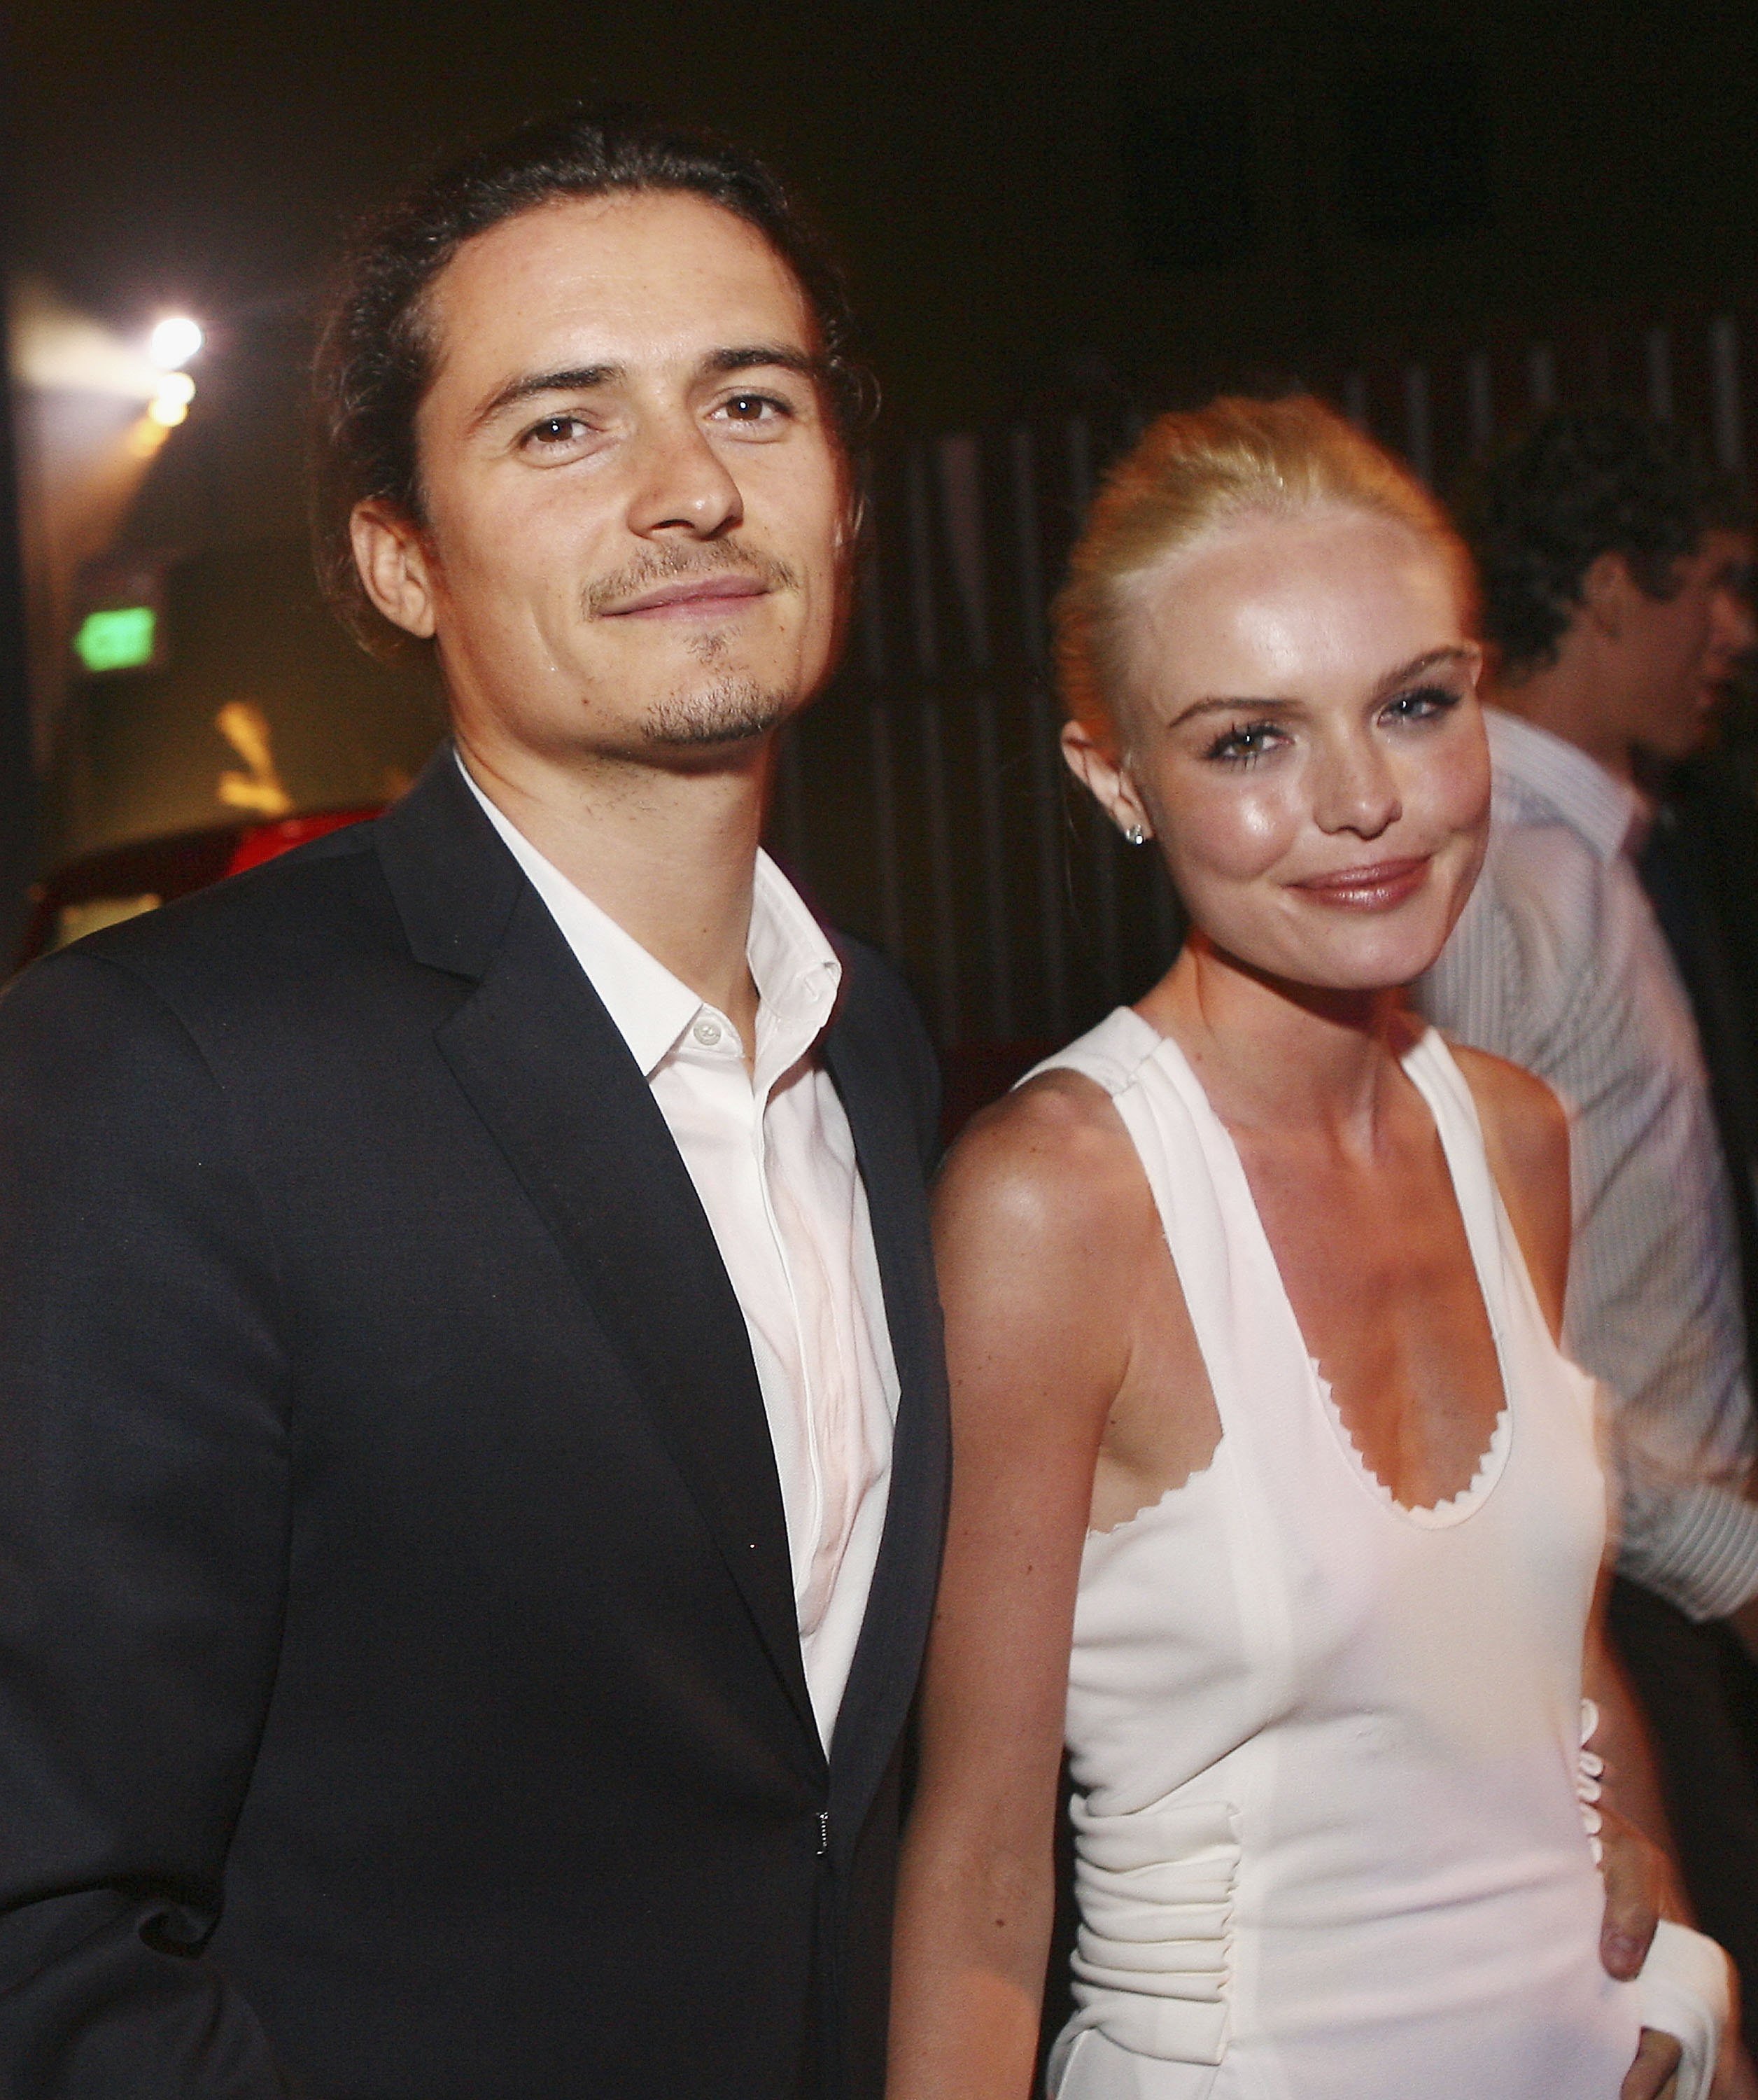 Orlando Bloom and Kate Bosworth attend the afterparty for the premiere of Warner Bros."Superman Returns" on June 21, 2006, in Los Angeles, California. | Source: Getty Images